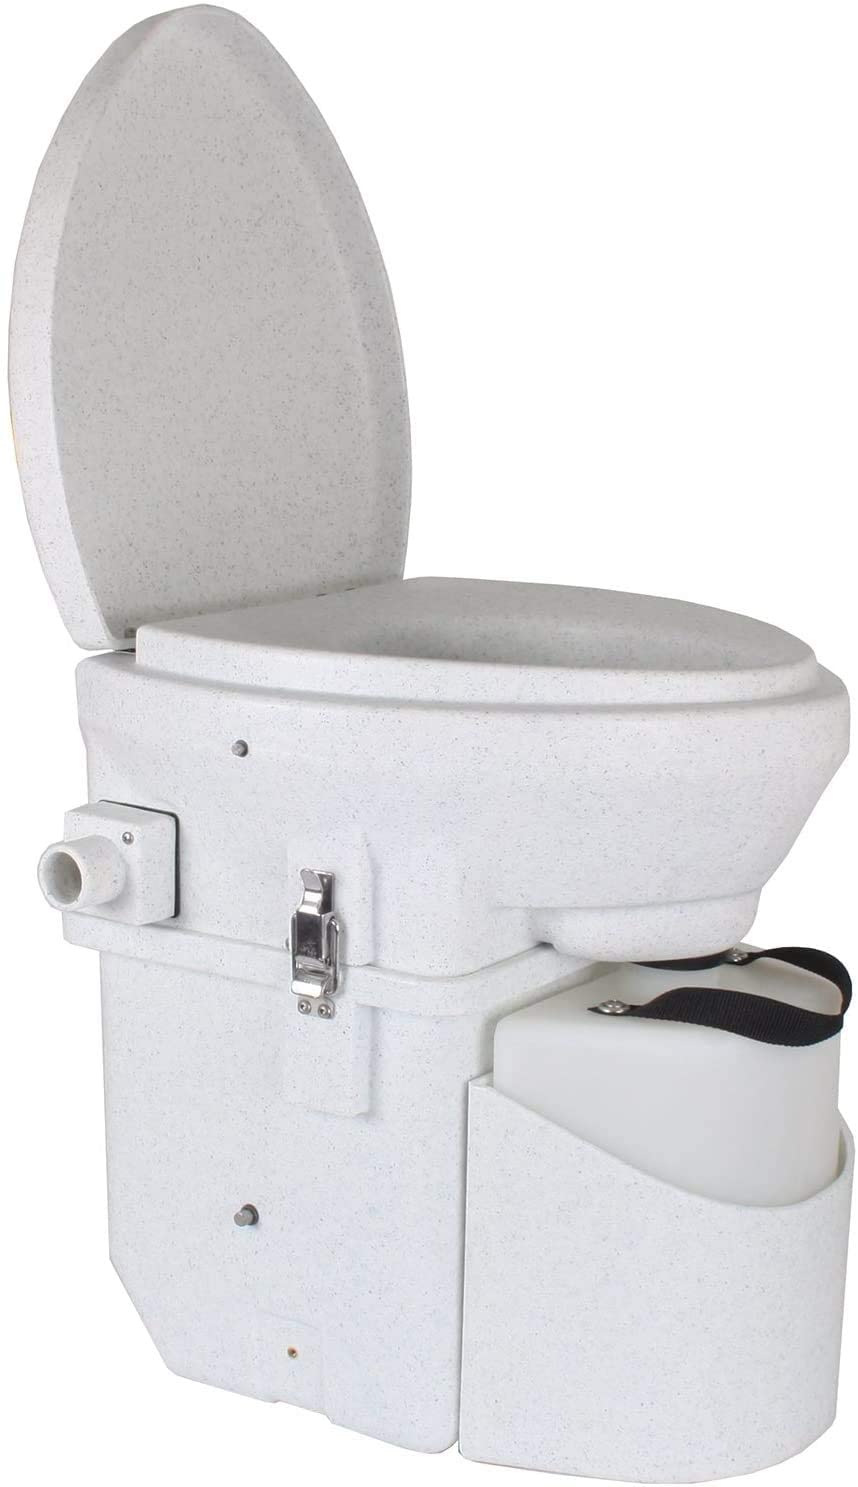 Nature's Head Composting RV Toilet – The Best Composting RV Toilet